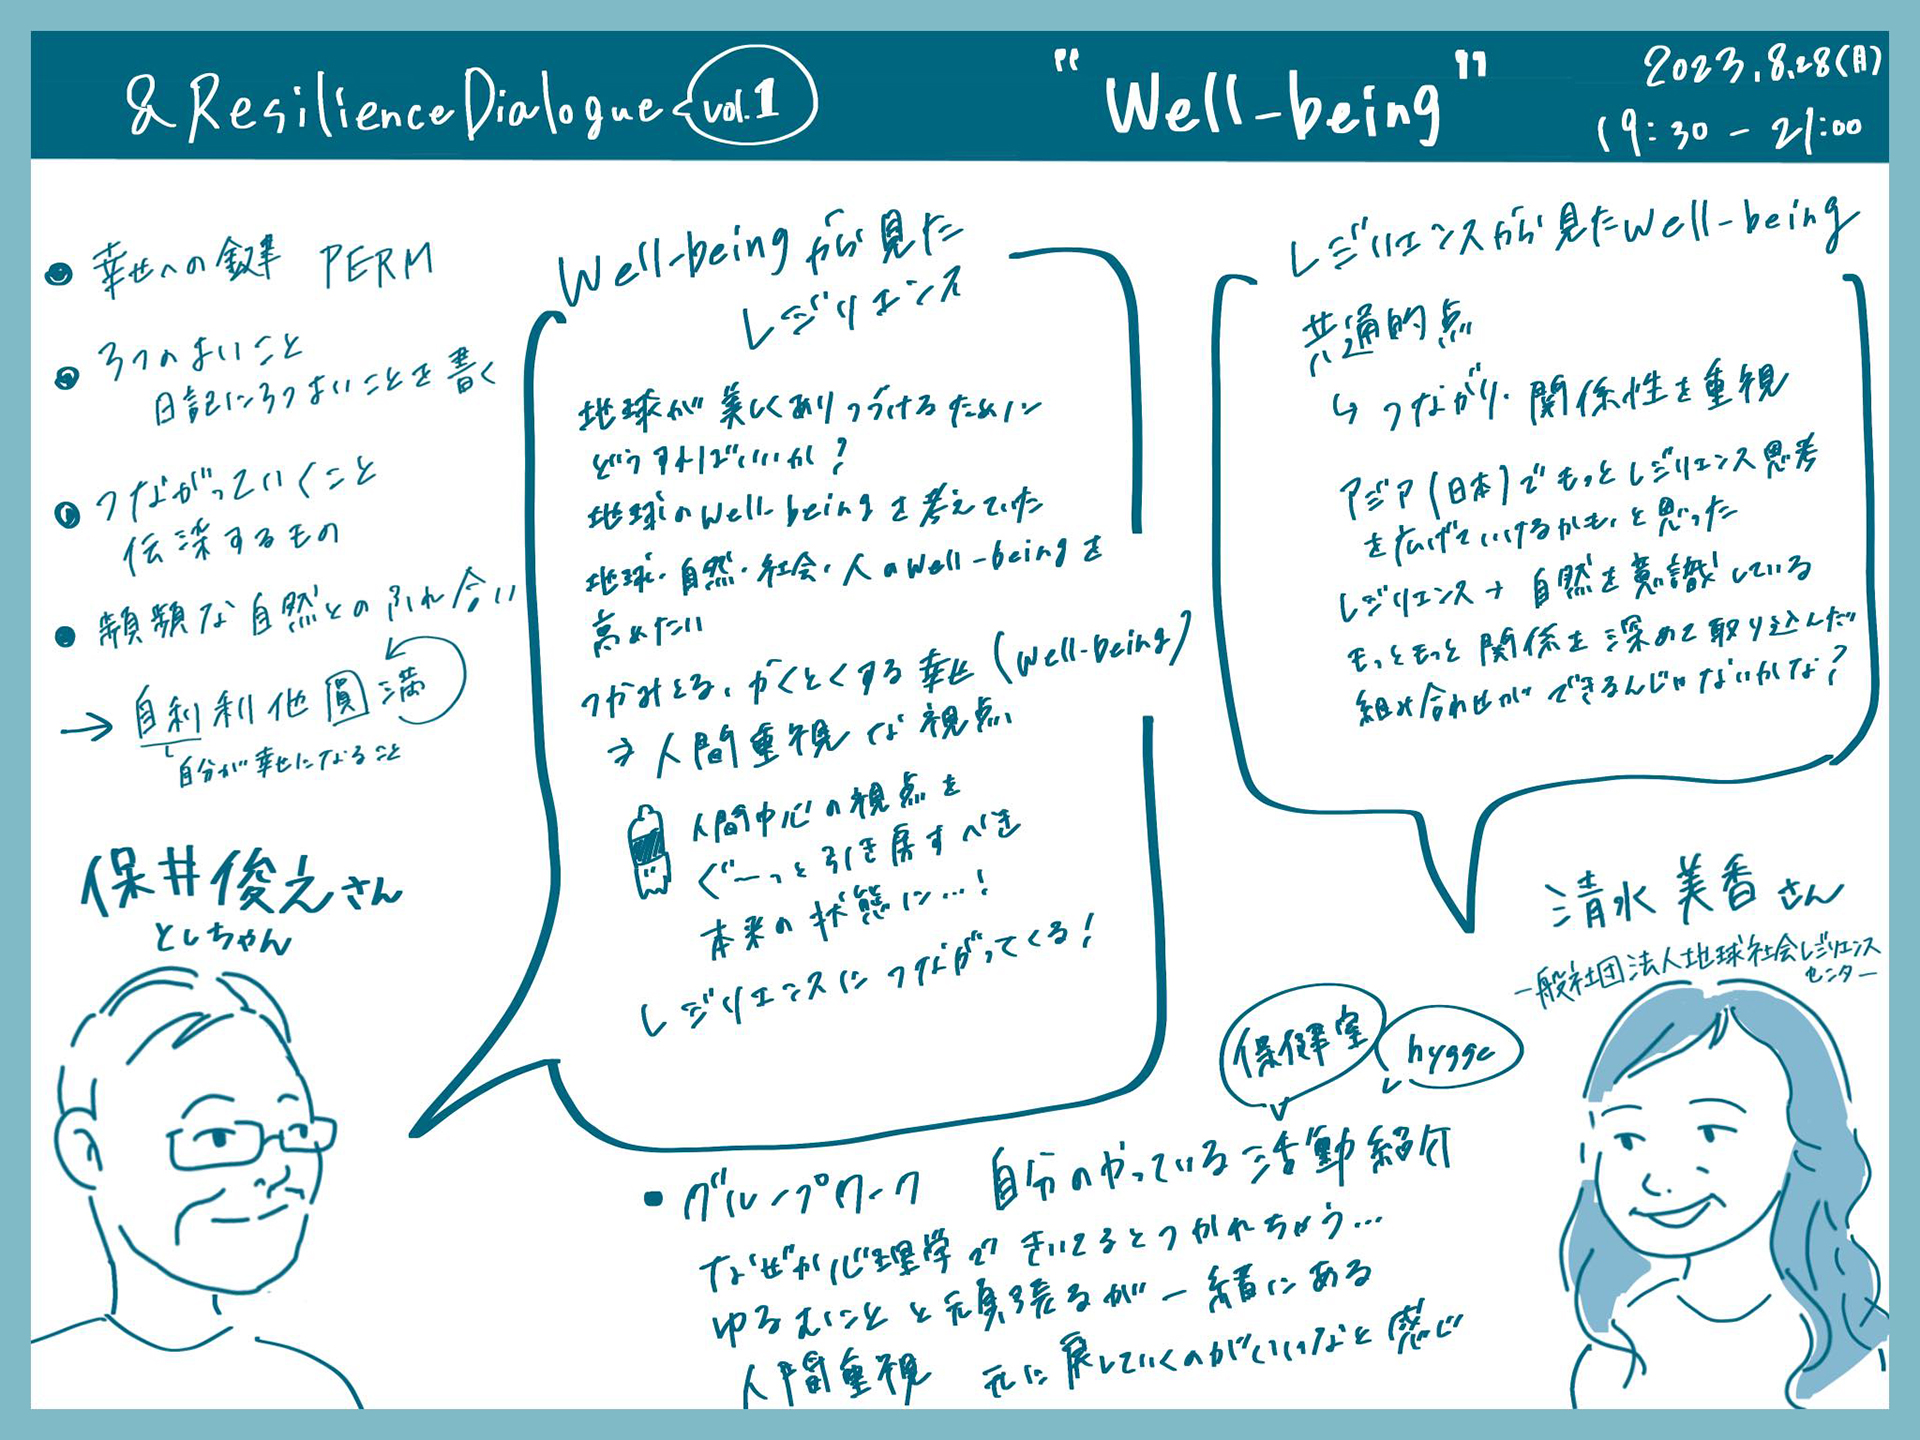 & Resilience Dialogue Vol.01 "Well-being"